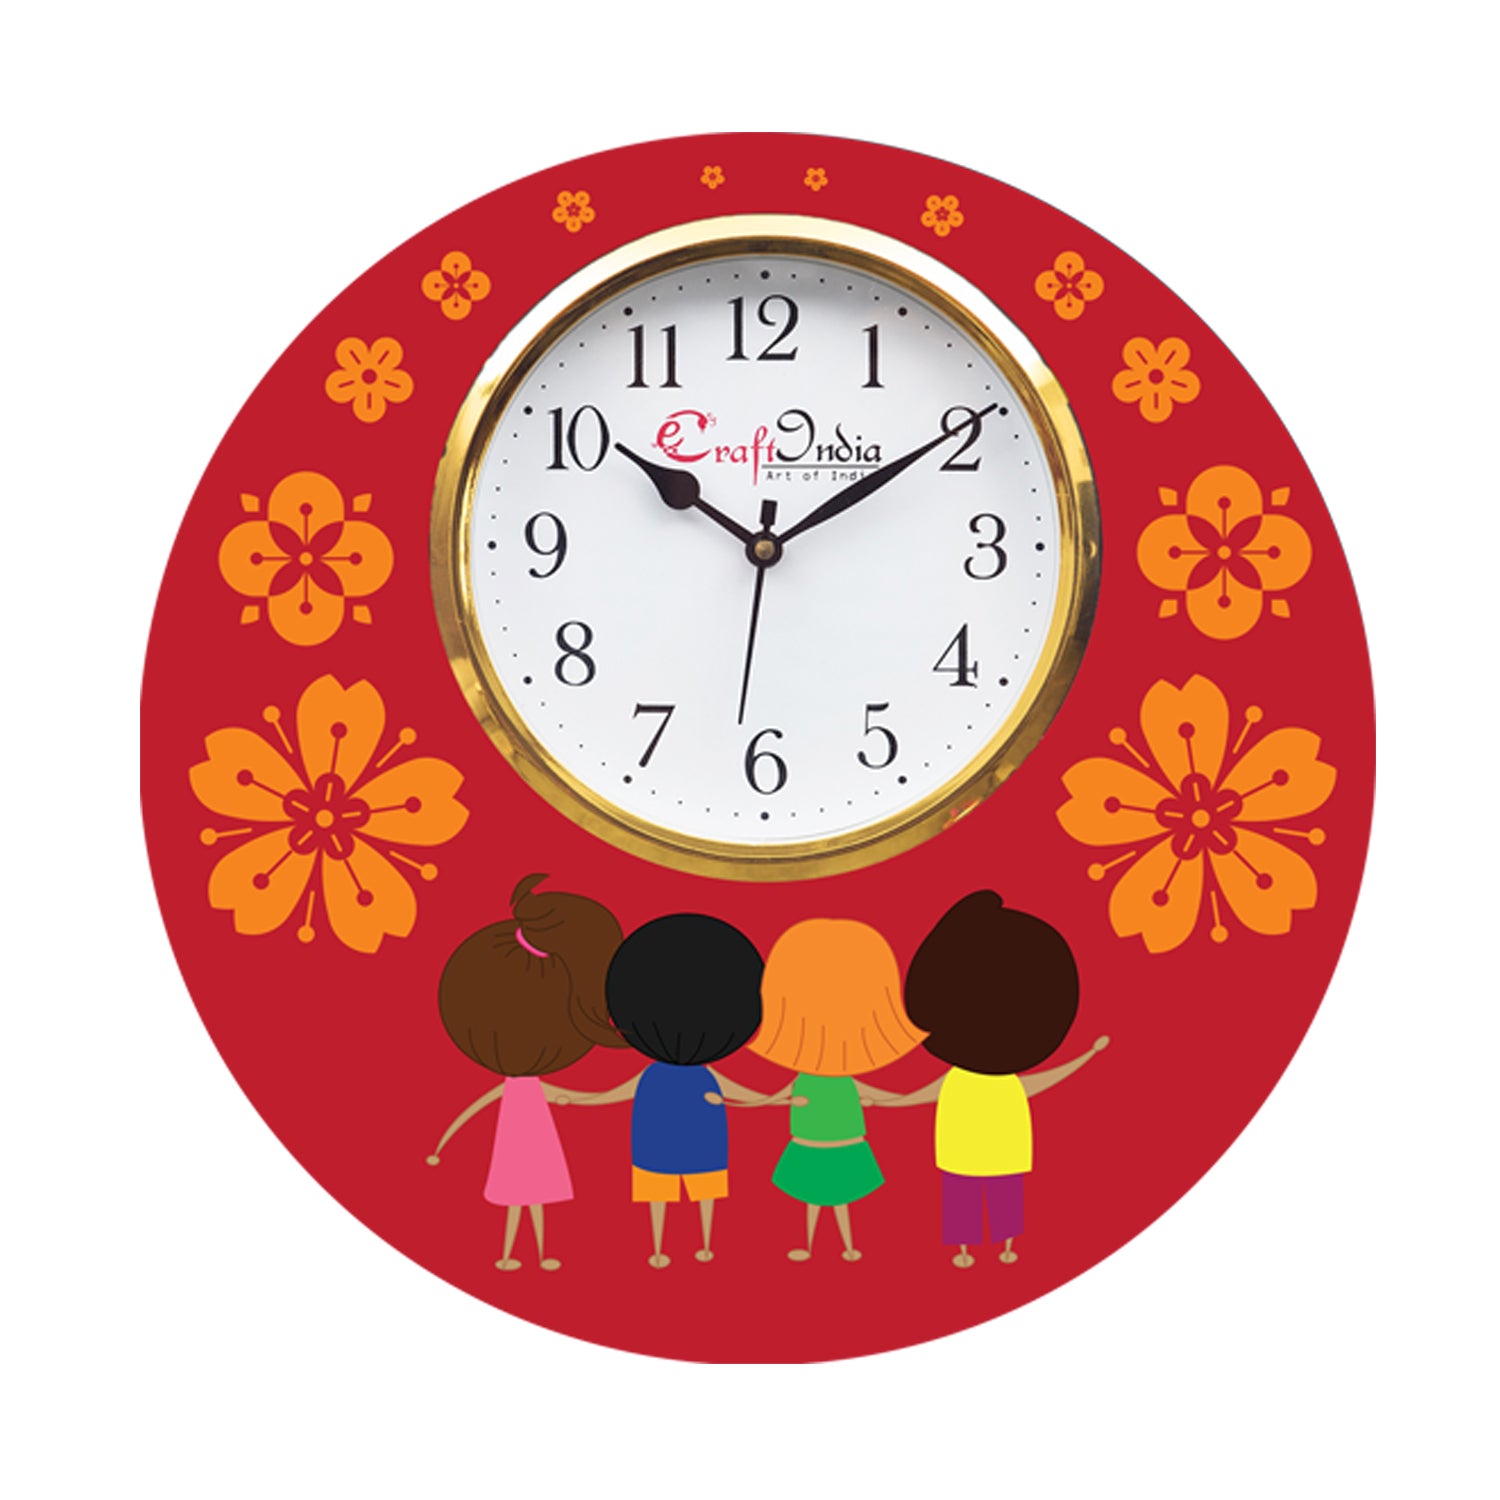 Friendship Theme Wooden Colorful Round Wall Clock